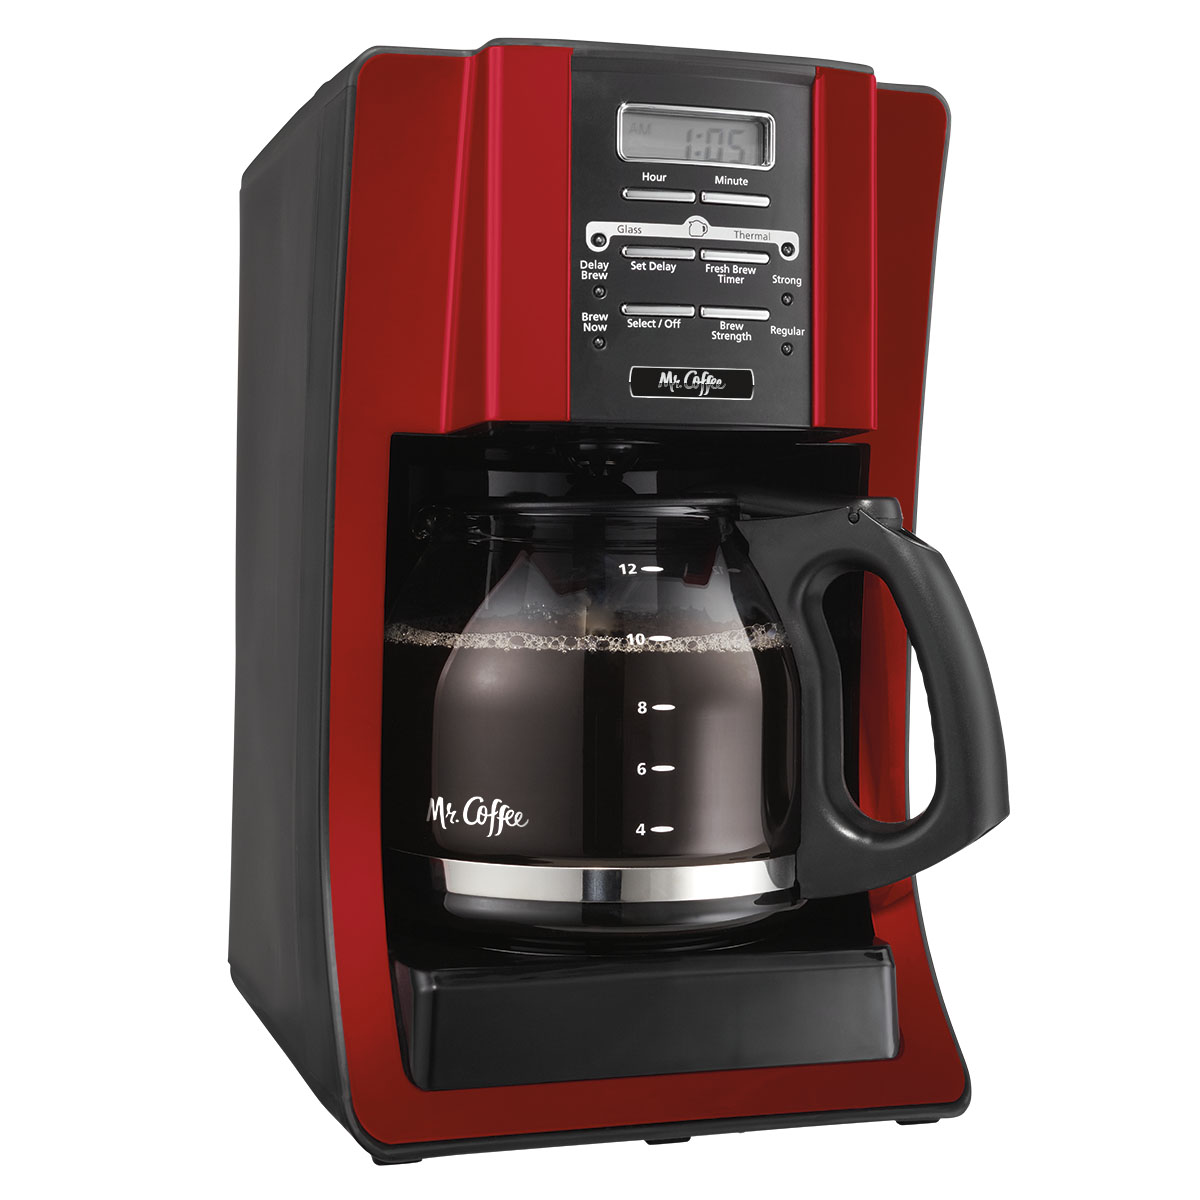 Mr. Coffee®12-Cup Programmable Coffee Maker with Rapid Brew System 